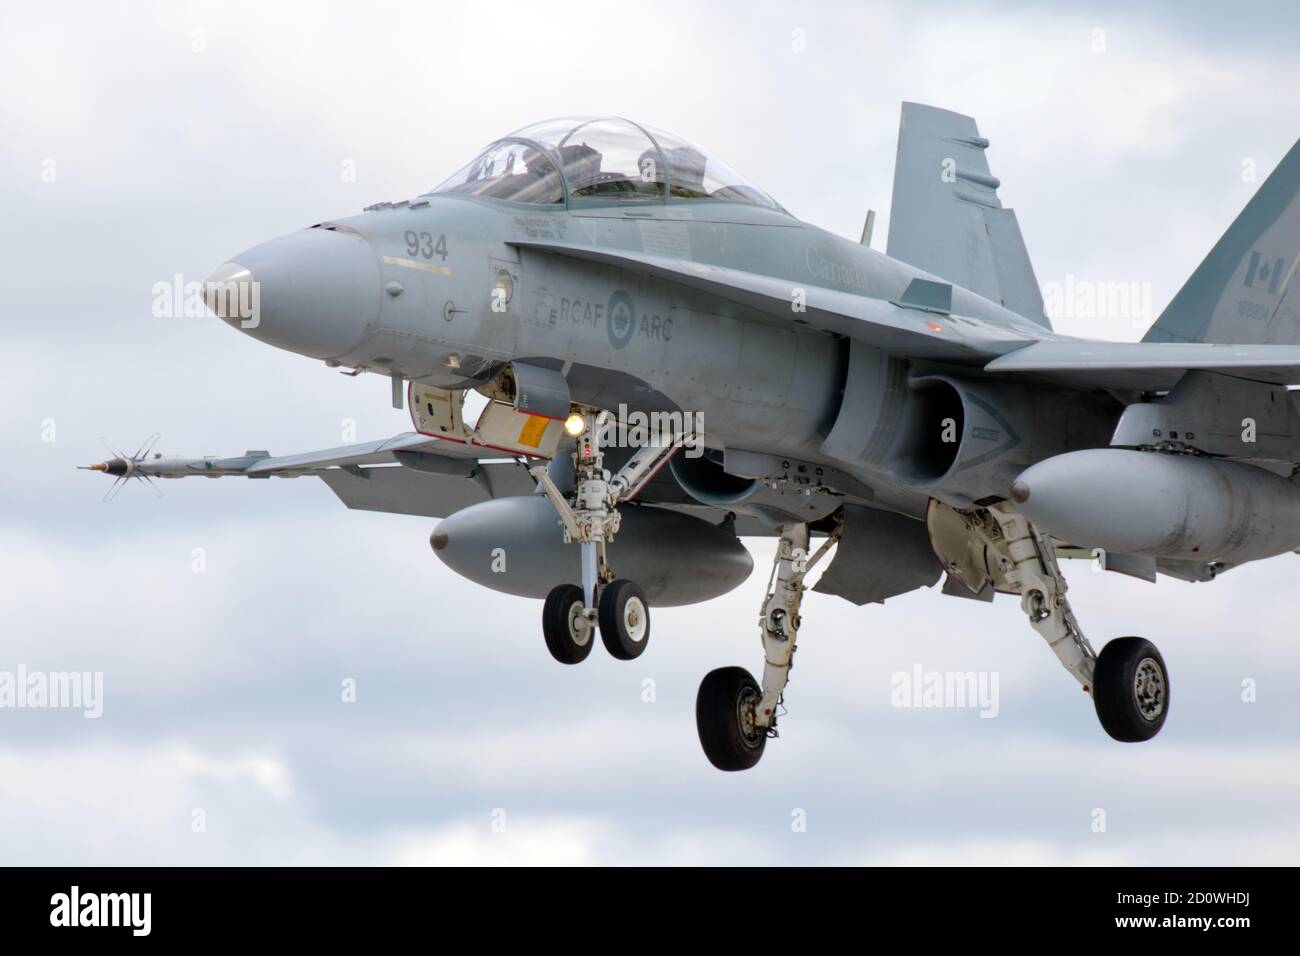 A Royal Canadian Air Force (RCAF) CF-18 Hornet landing at Airshow London 2020 Skydrive, an airshow held in London, Ontario, Canada. Stock Photo